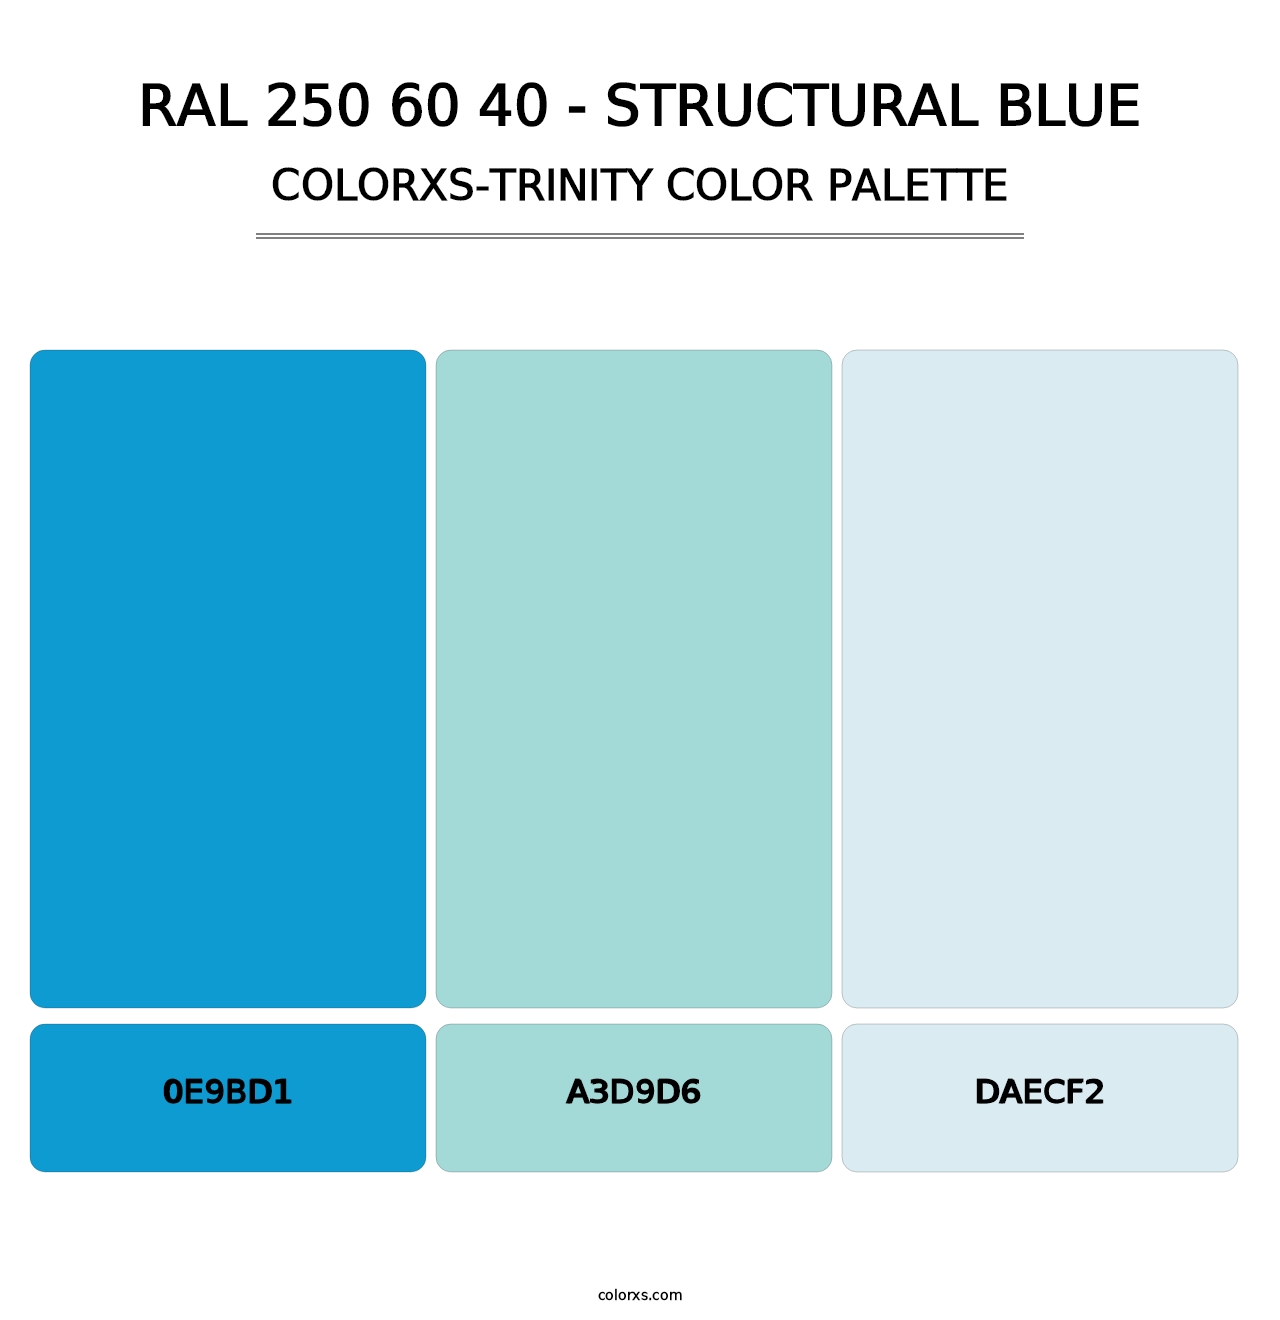 RAL 250 60 40 - Structural Blue - Colorxs Trinity Palette